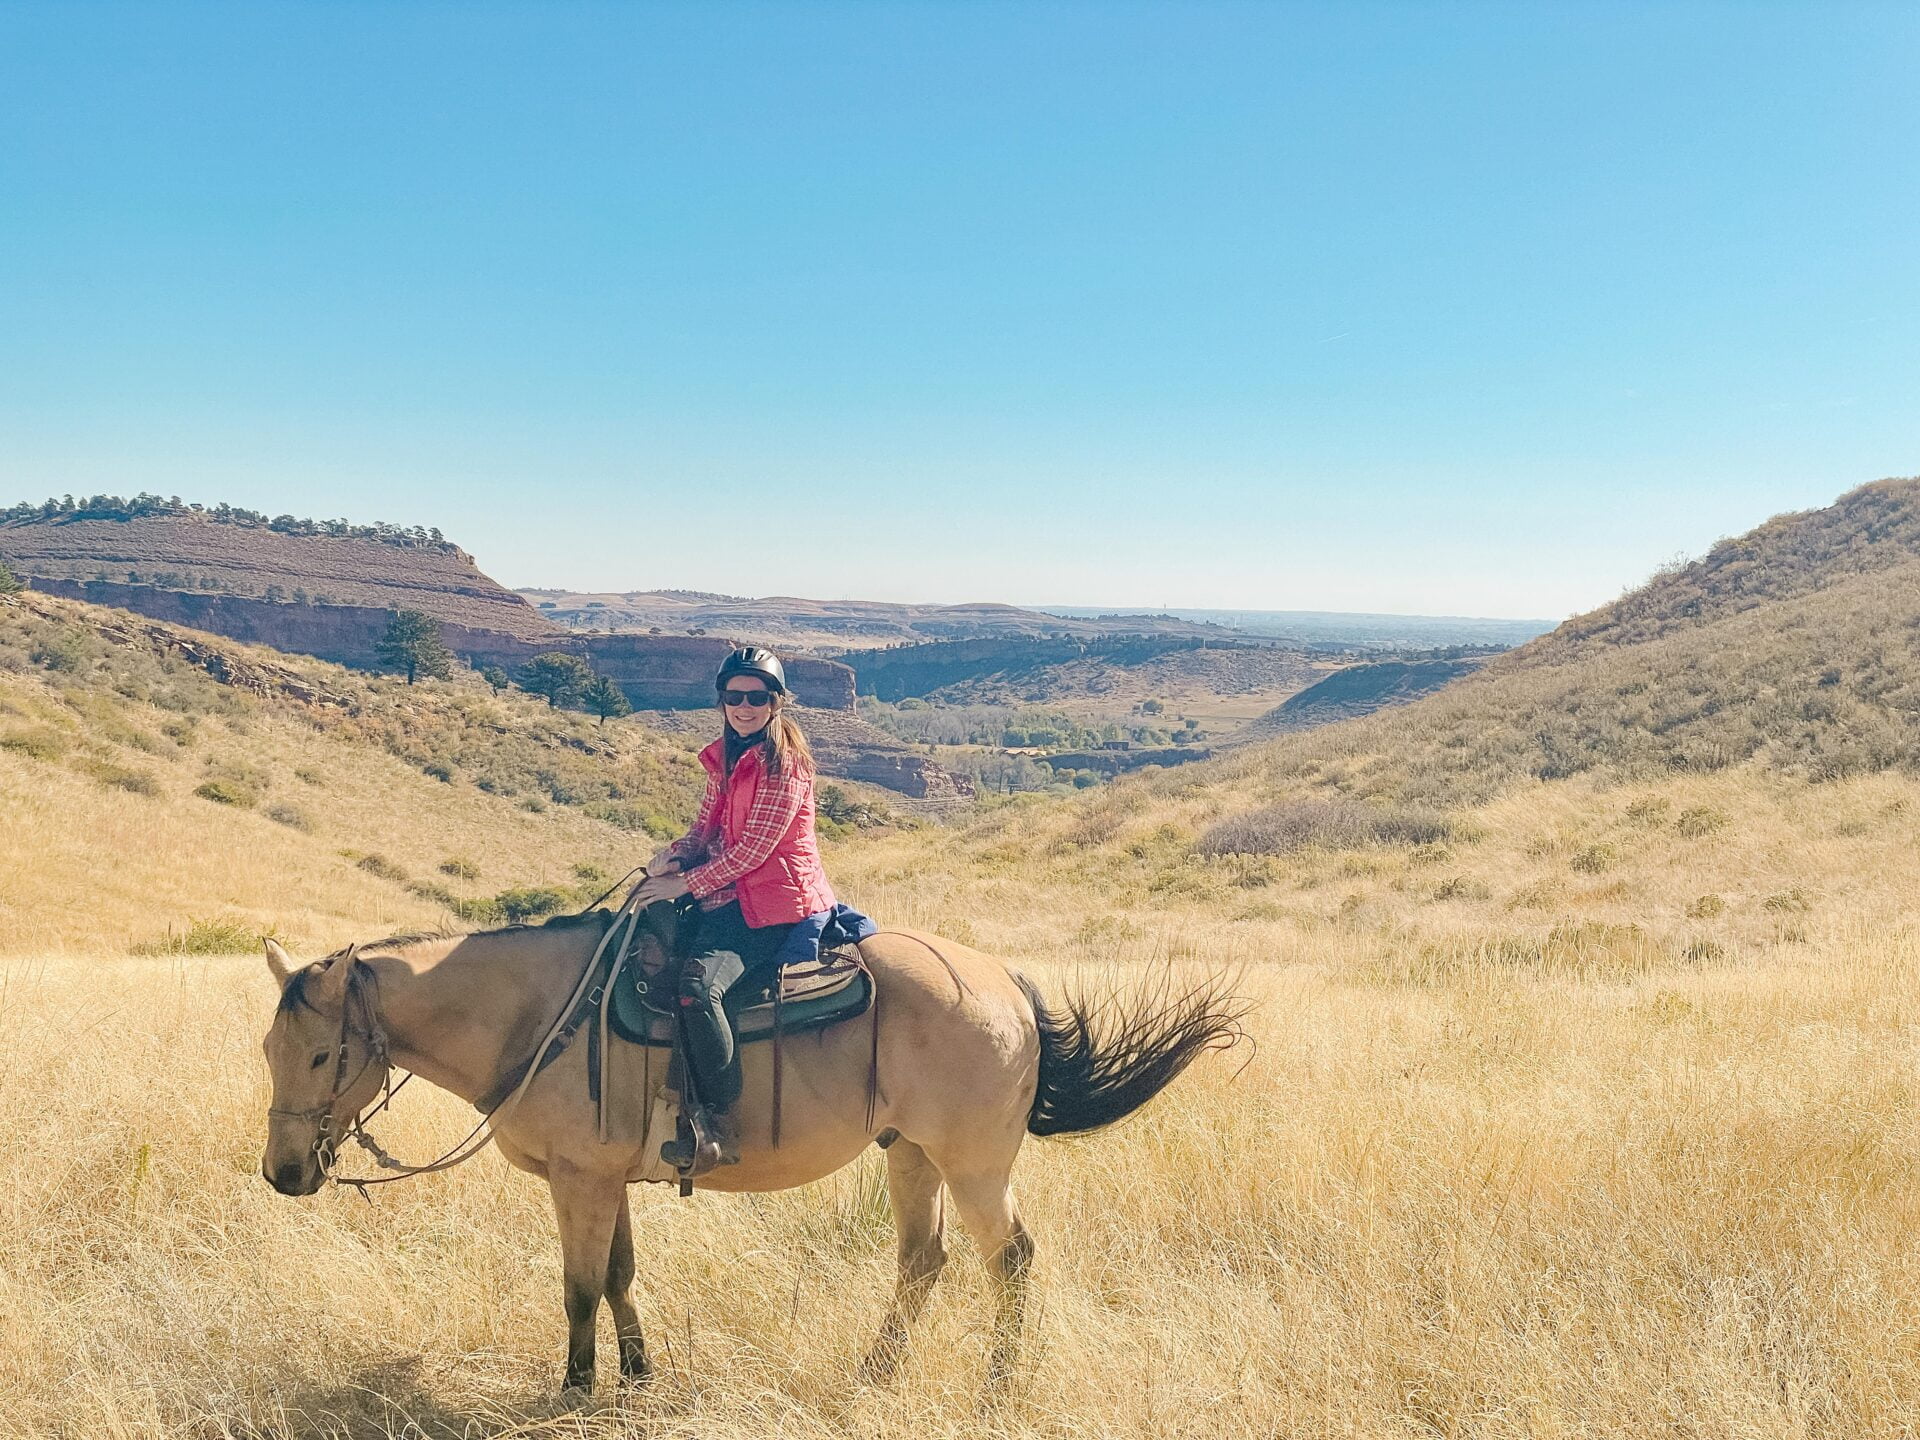 woman sits on horseback, standing in a tall grass field, colorado landscape in the background.